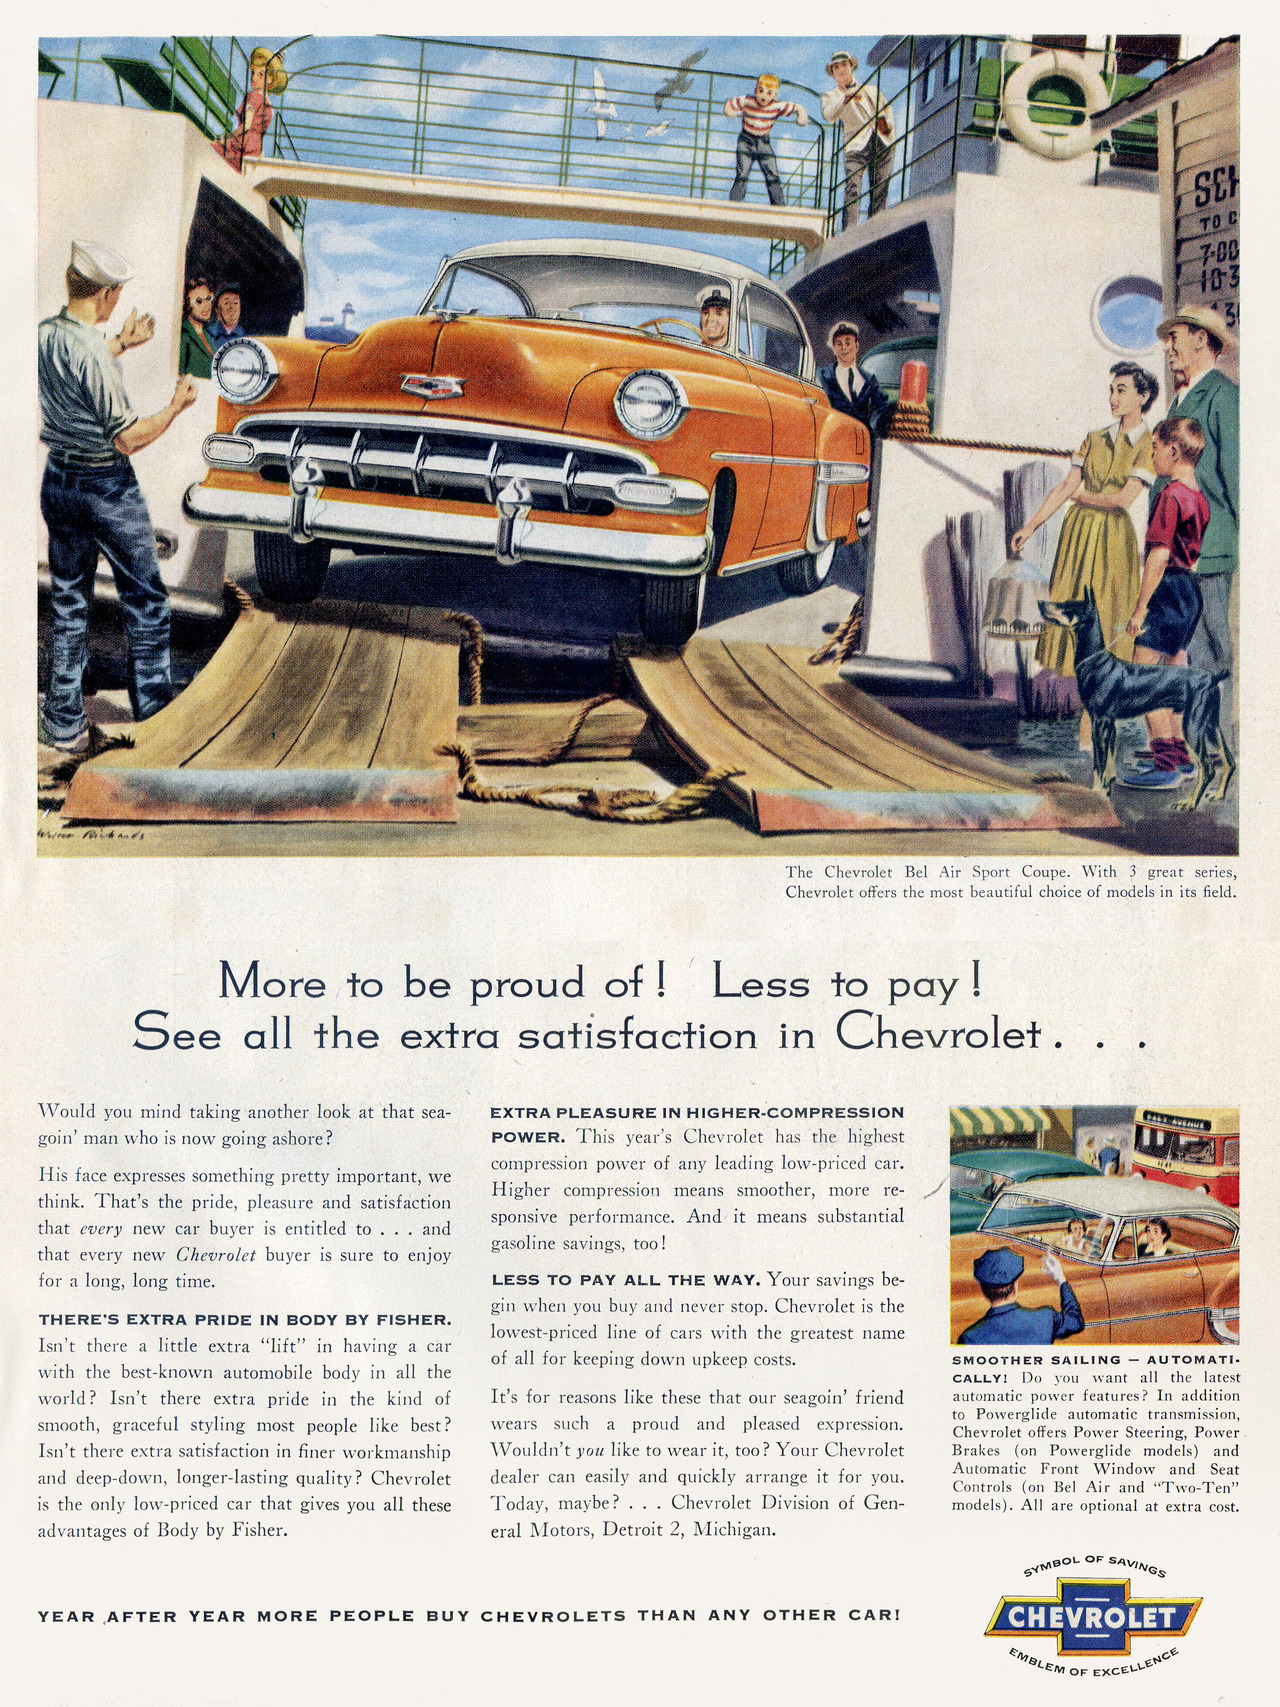 1954 Chevrolet Bel Air Sport Coupe - published in Better Homes and Gardens - August 1954